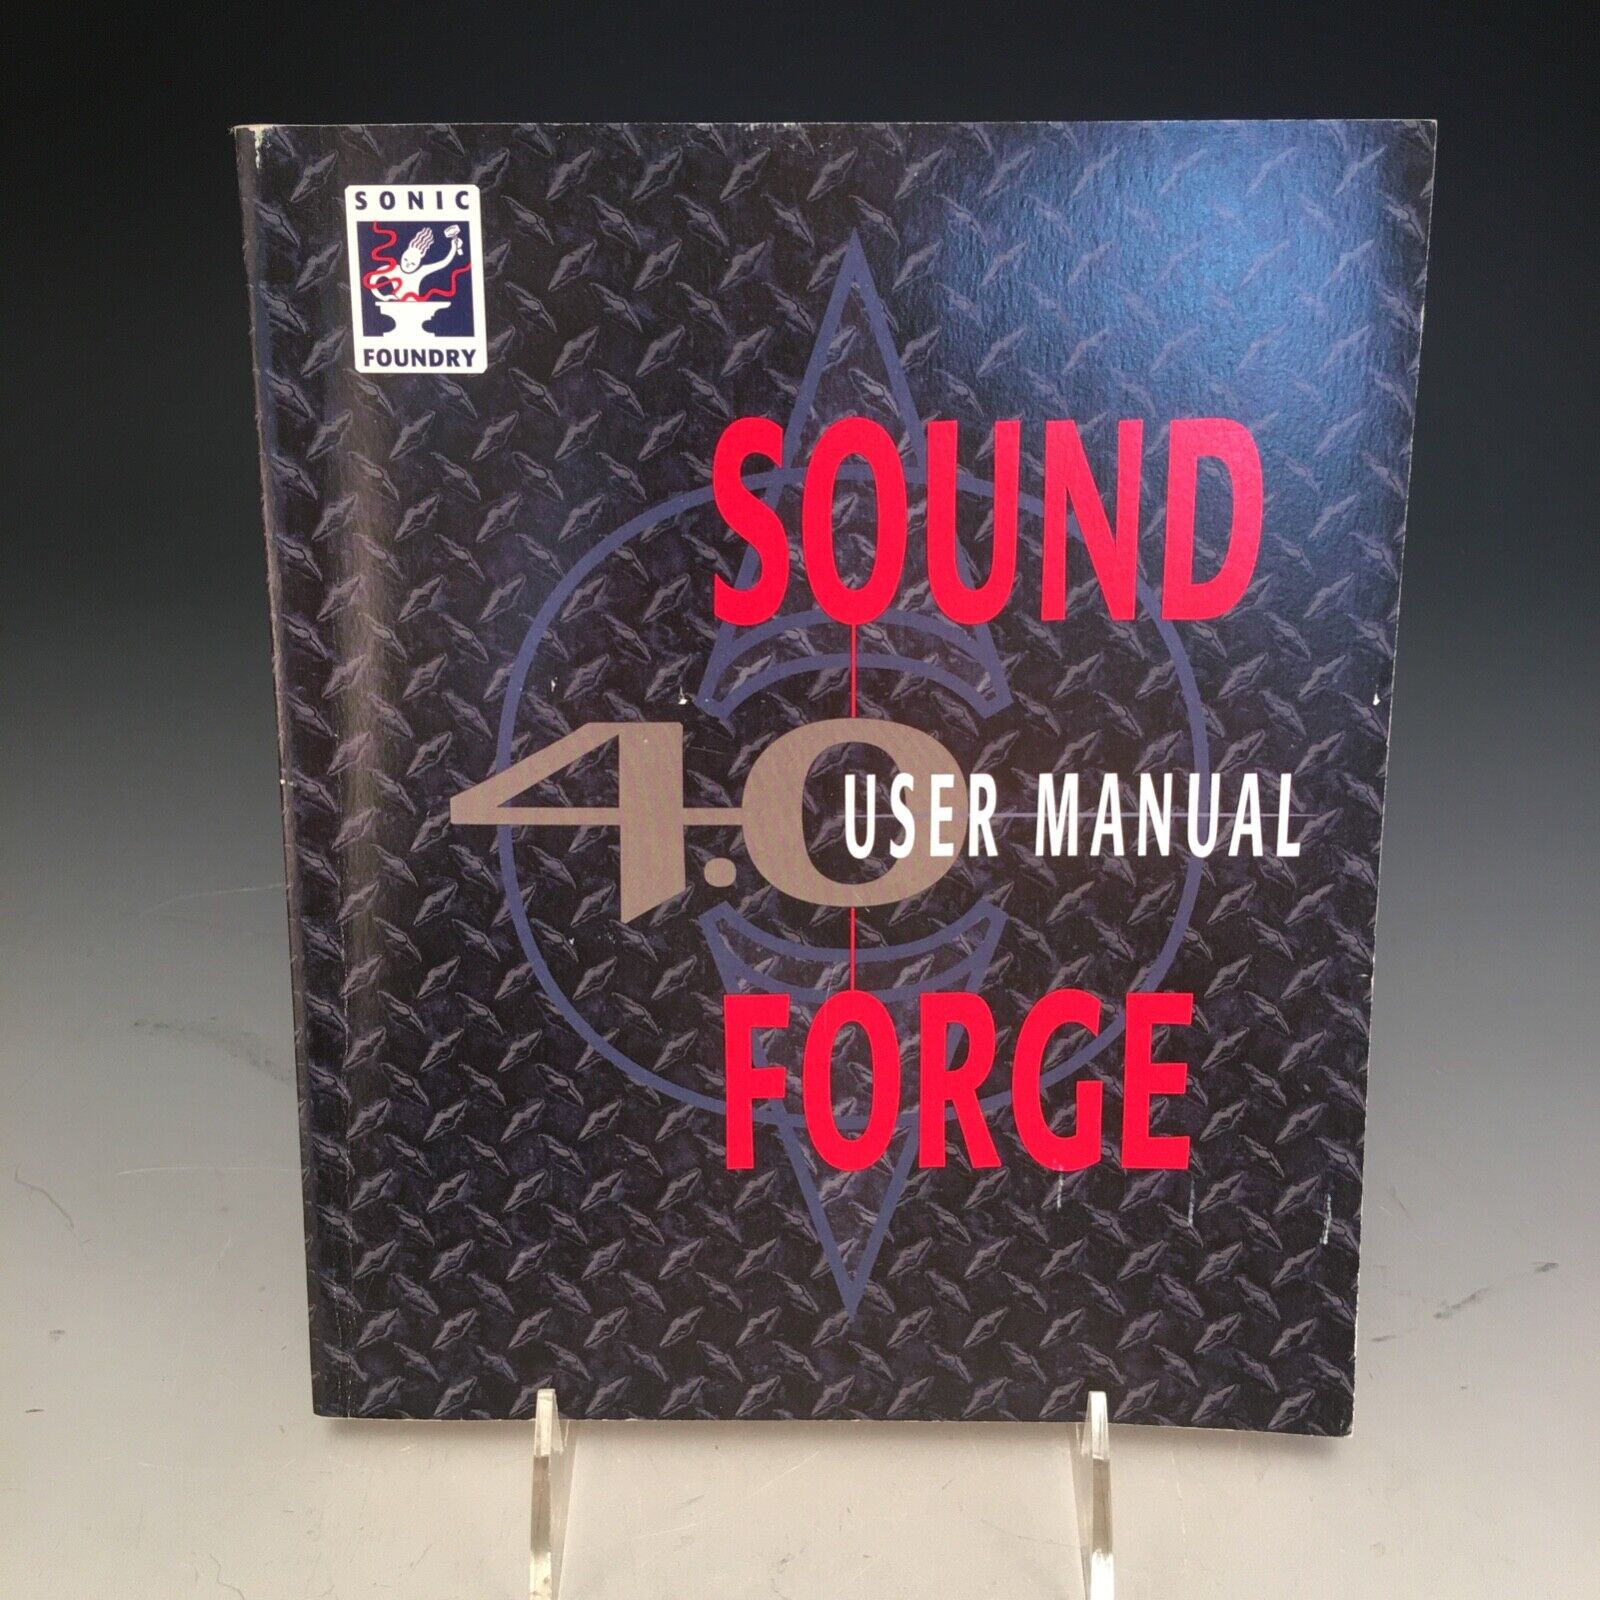 Rare Vintage Sonic Foundry Sound Forge 4.0 Wave Editor User Manuals & Serial #s